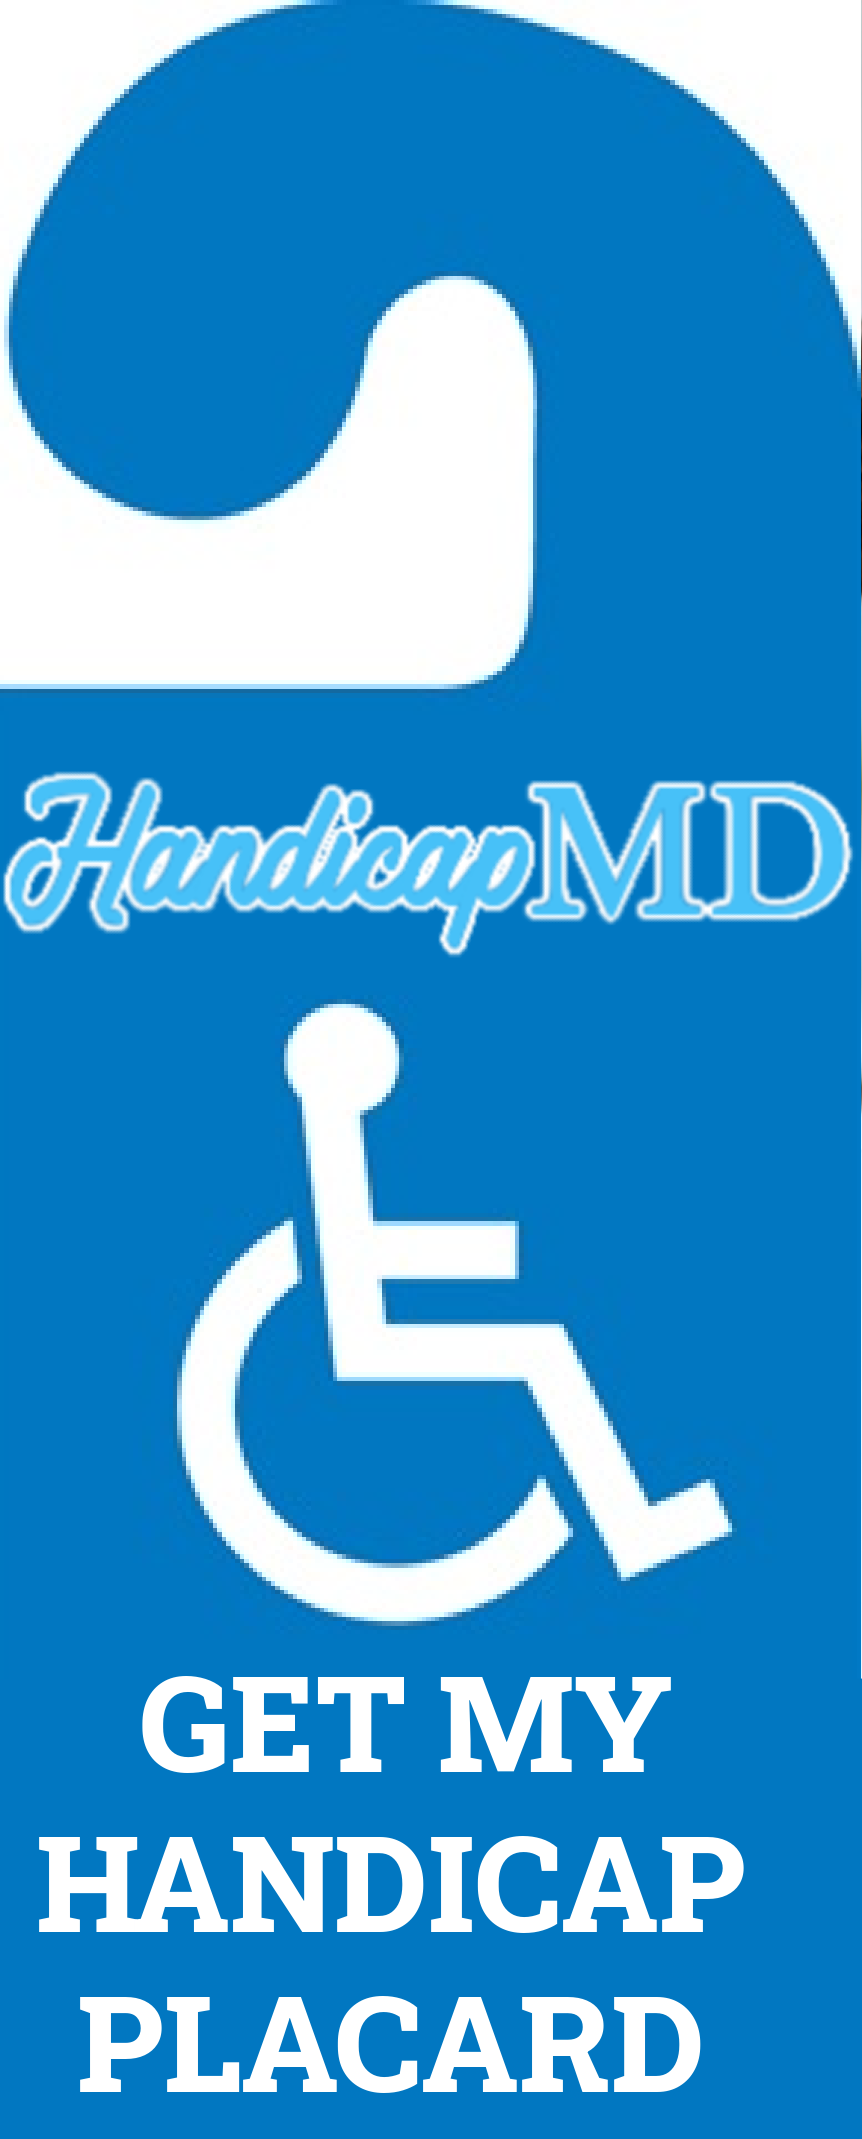 Tips for Displaying Your Handicap Placard Correctly in New Jersey